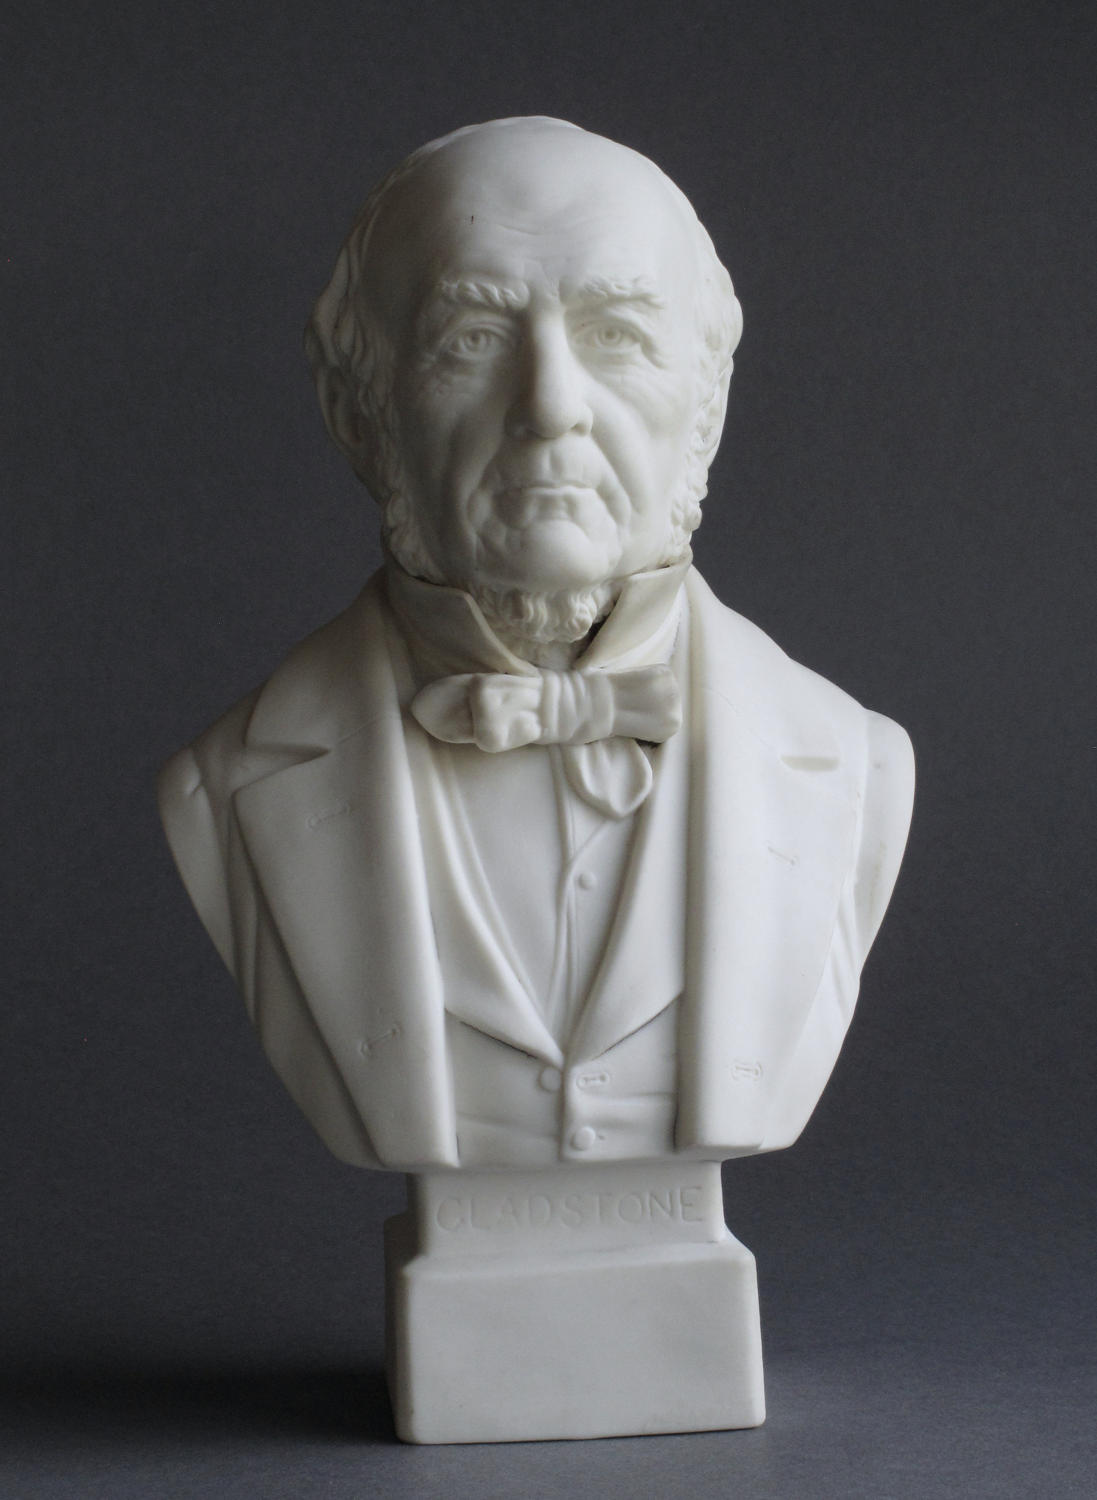 A small Parian bust of Gladstone by Robinson and Leadbeater